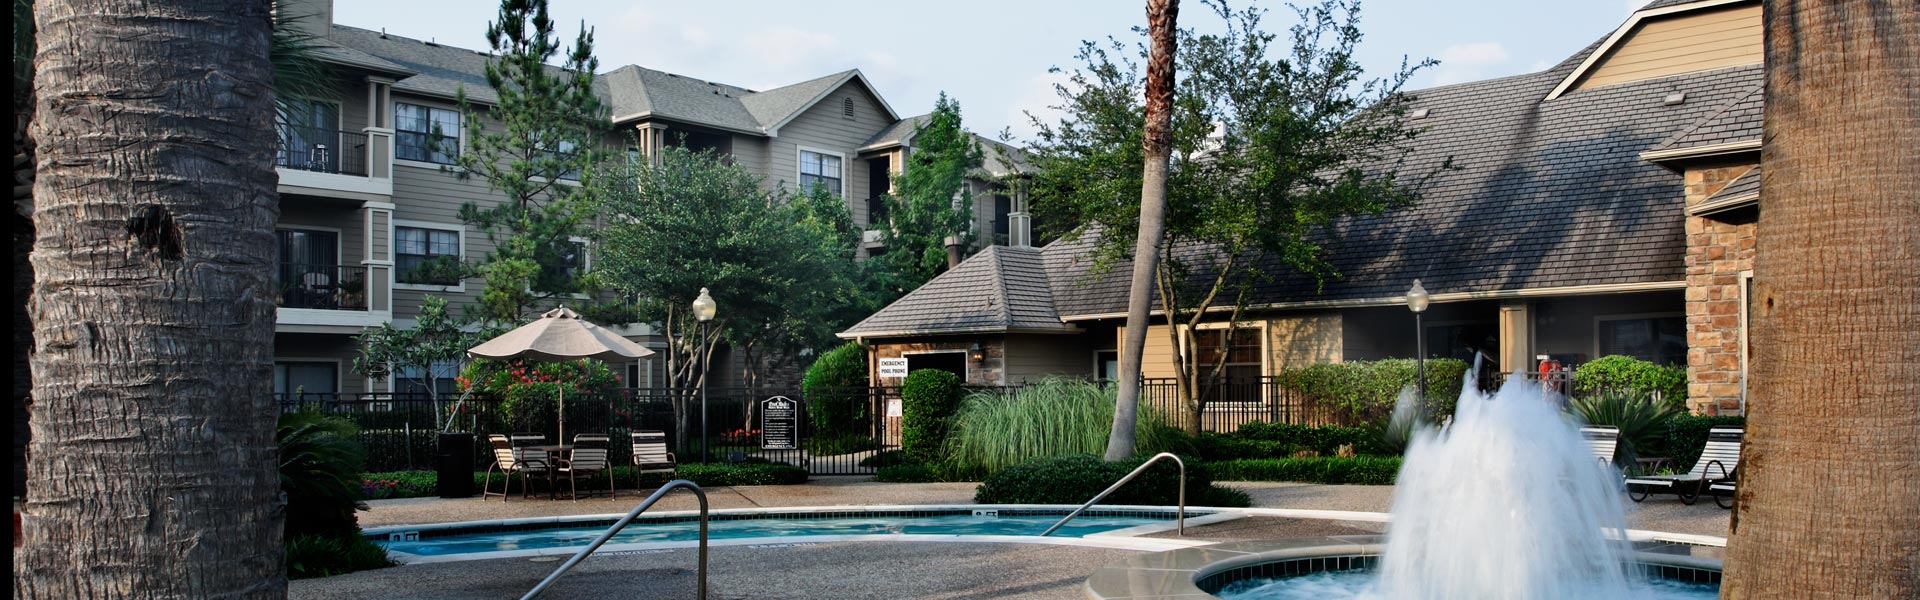 Texas Multifamily is one of many example DST Investments